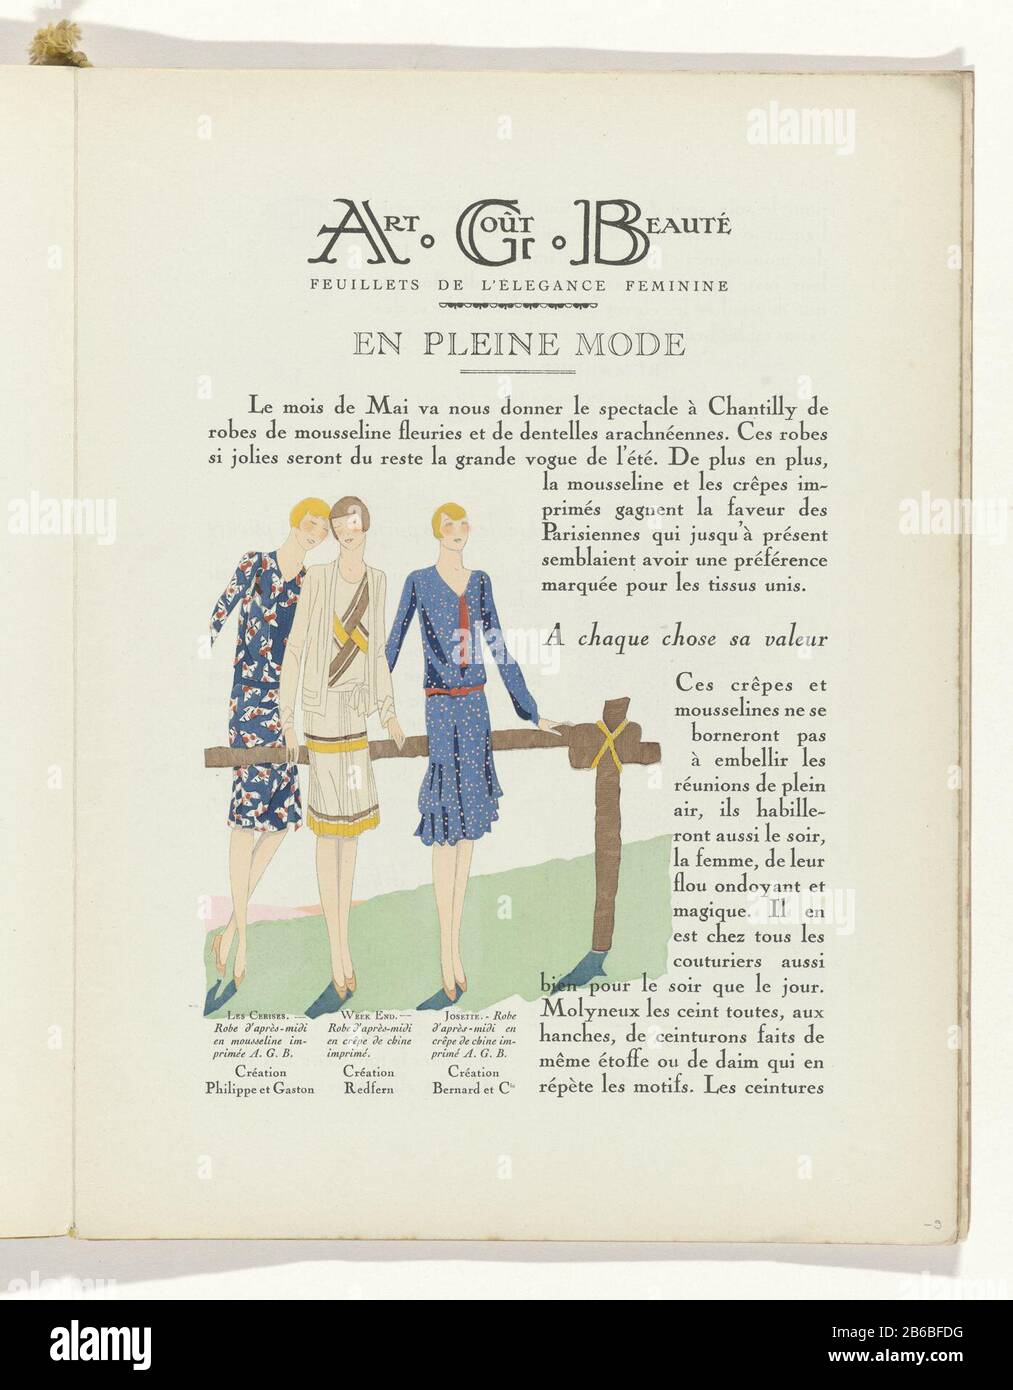 Text on the spring fashion. Illustration with afternoon dresses of Philippe  and Gaston, Redfern and Bernard & Cie page of the fashion magazine  Art-Gout-Beauté (1920-1933) . Manufacturer :. Printmaker: anonymous fashion  designer: